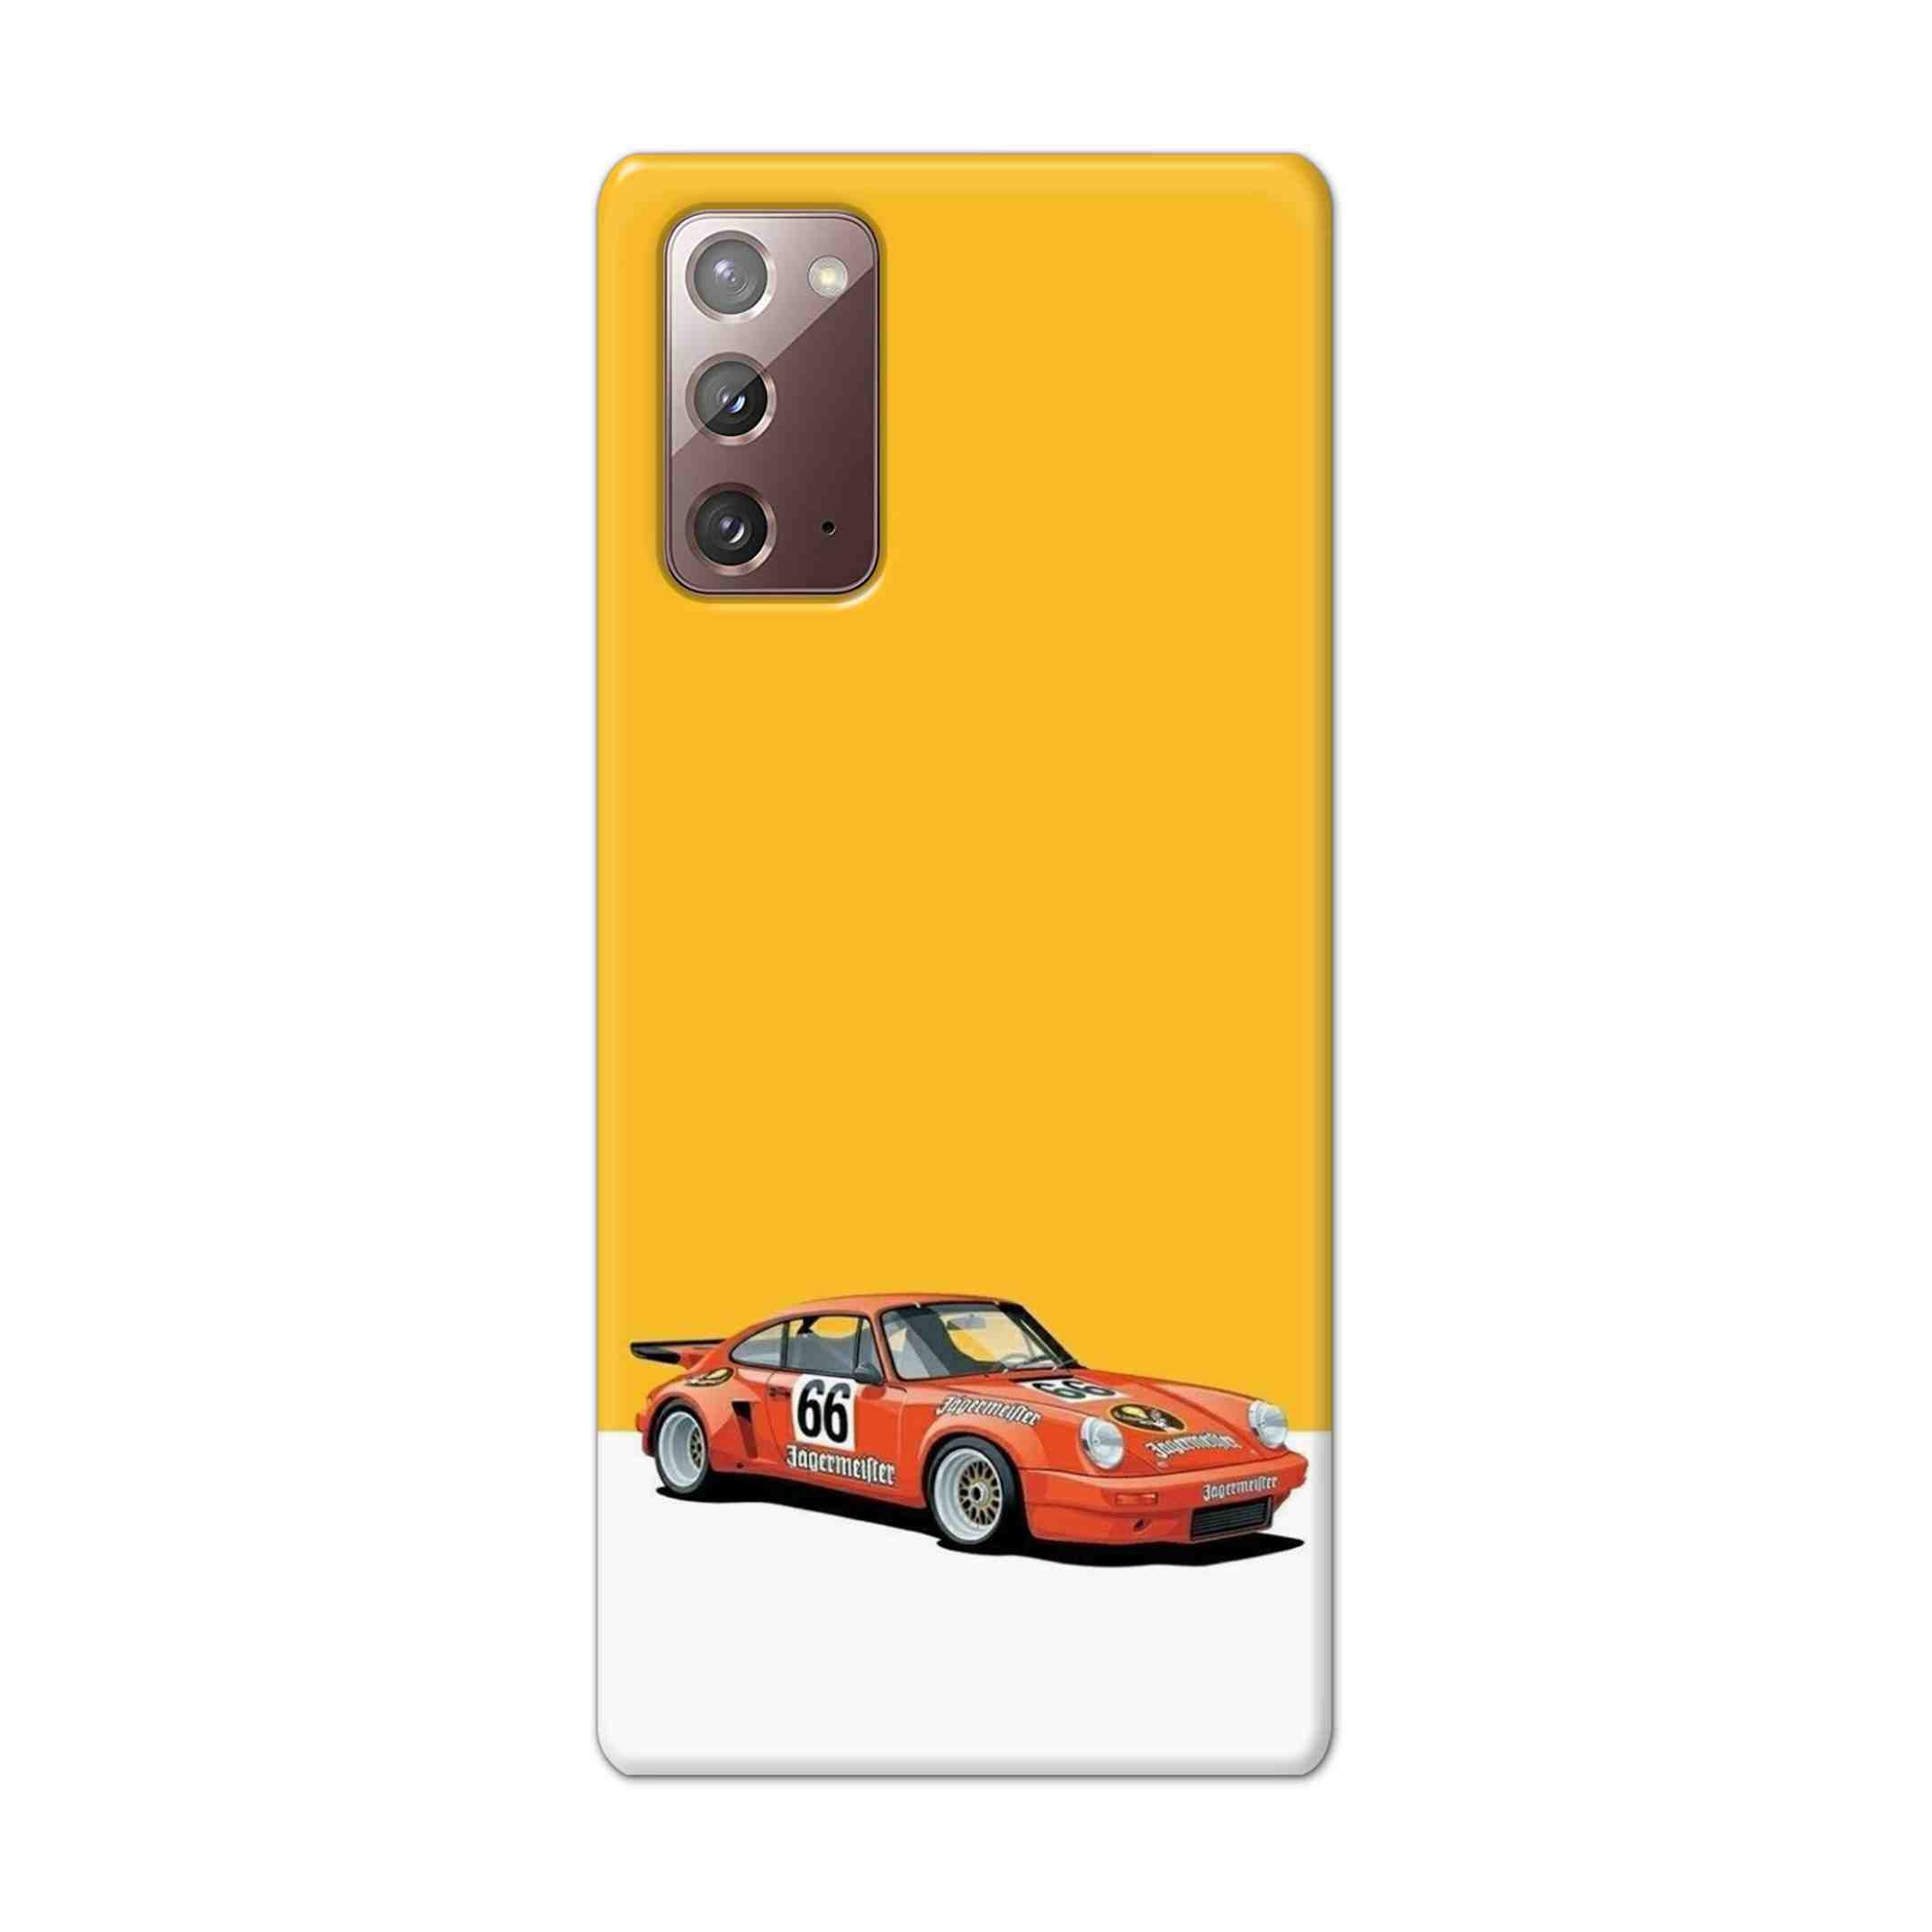 Buy Porche Hard Back Mobile Phone Case Cover For Samsung Galaxy Note 20 Online